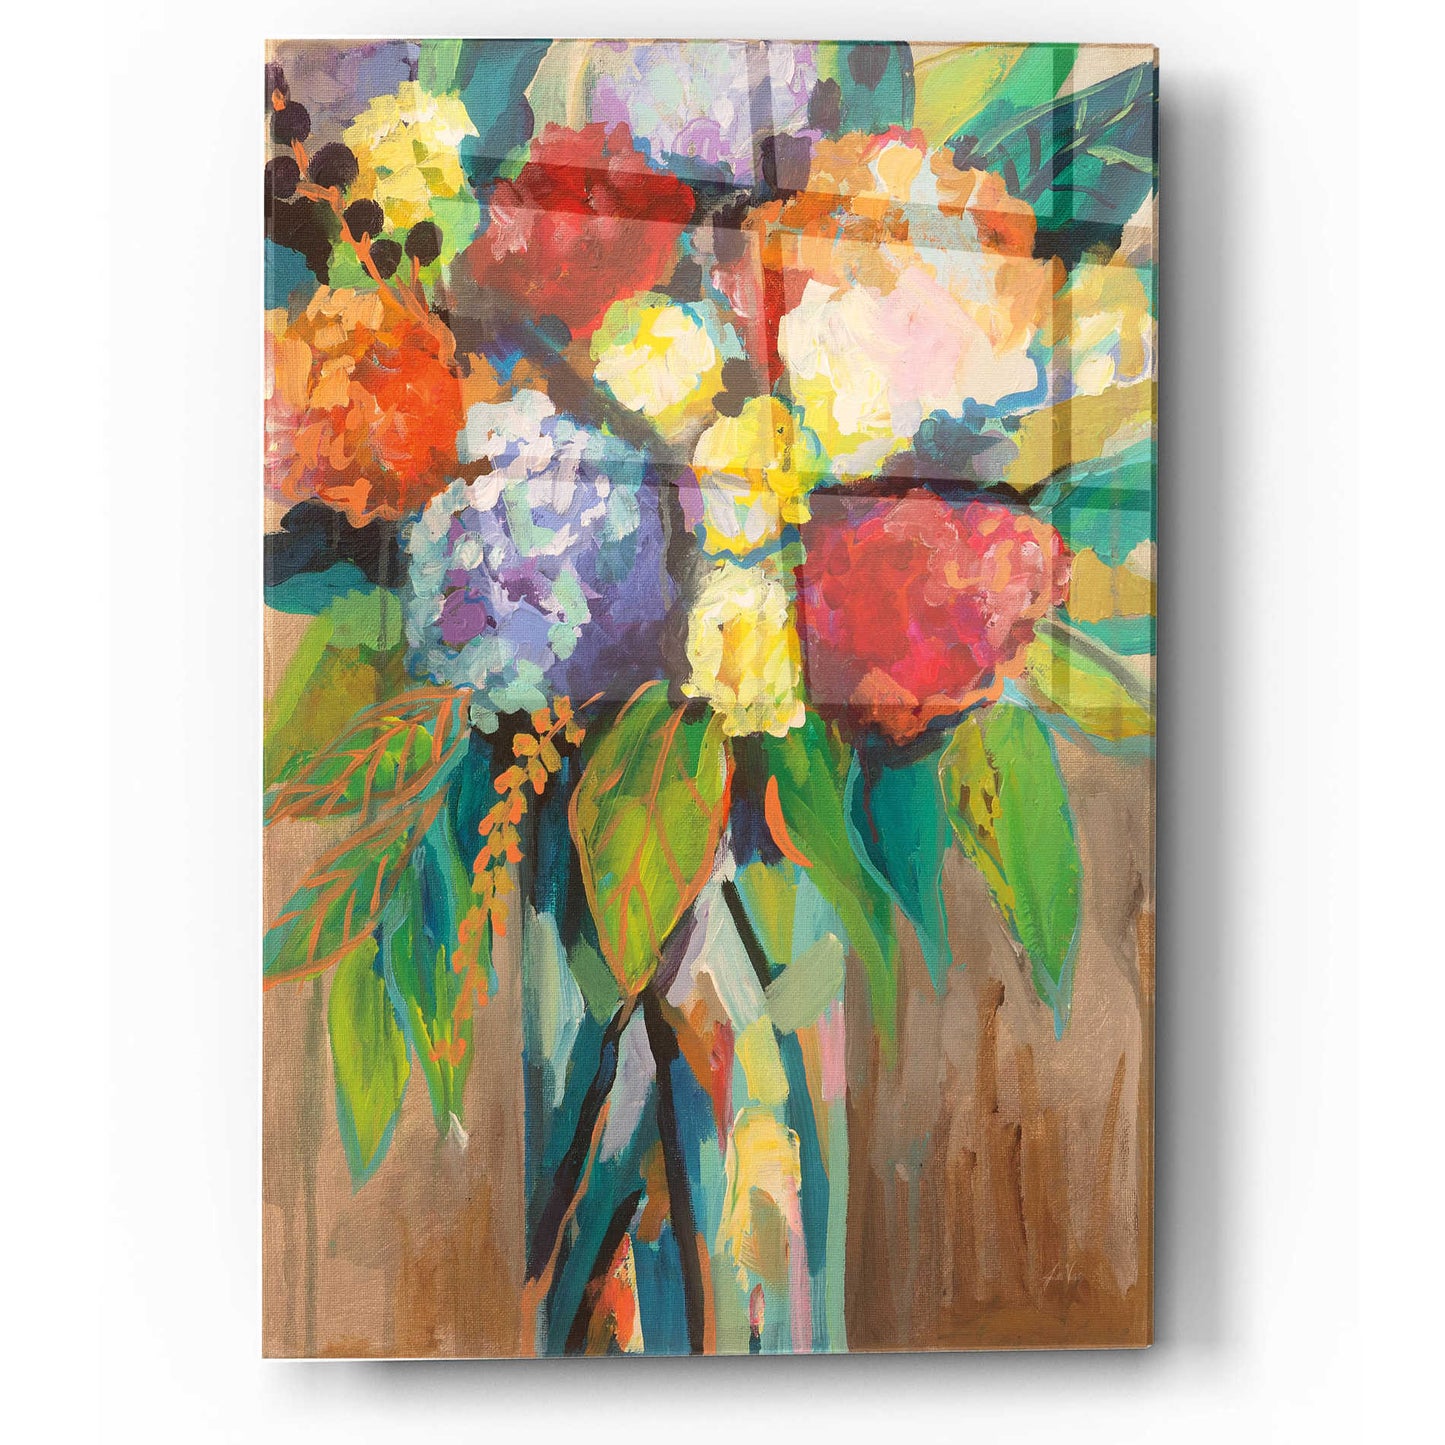 Epic Art 'Colorful' by Jeanette Vertentes, Acrylic Glass Wall Art